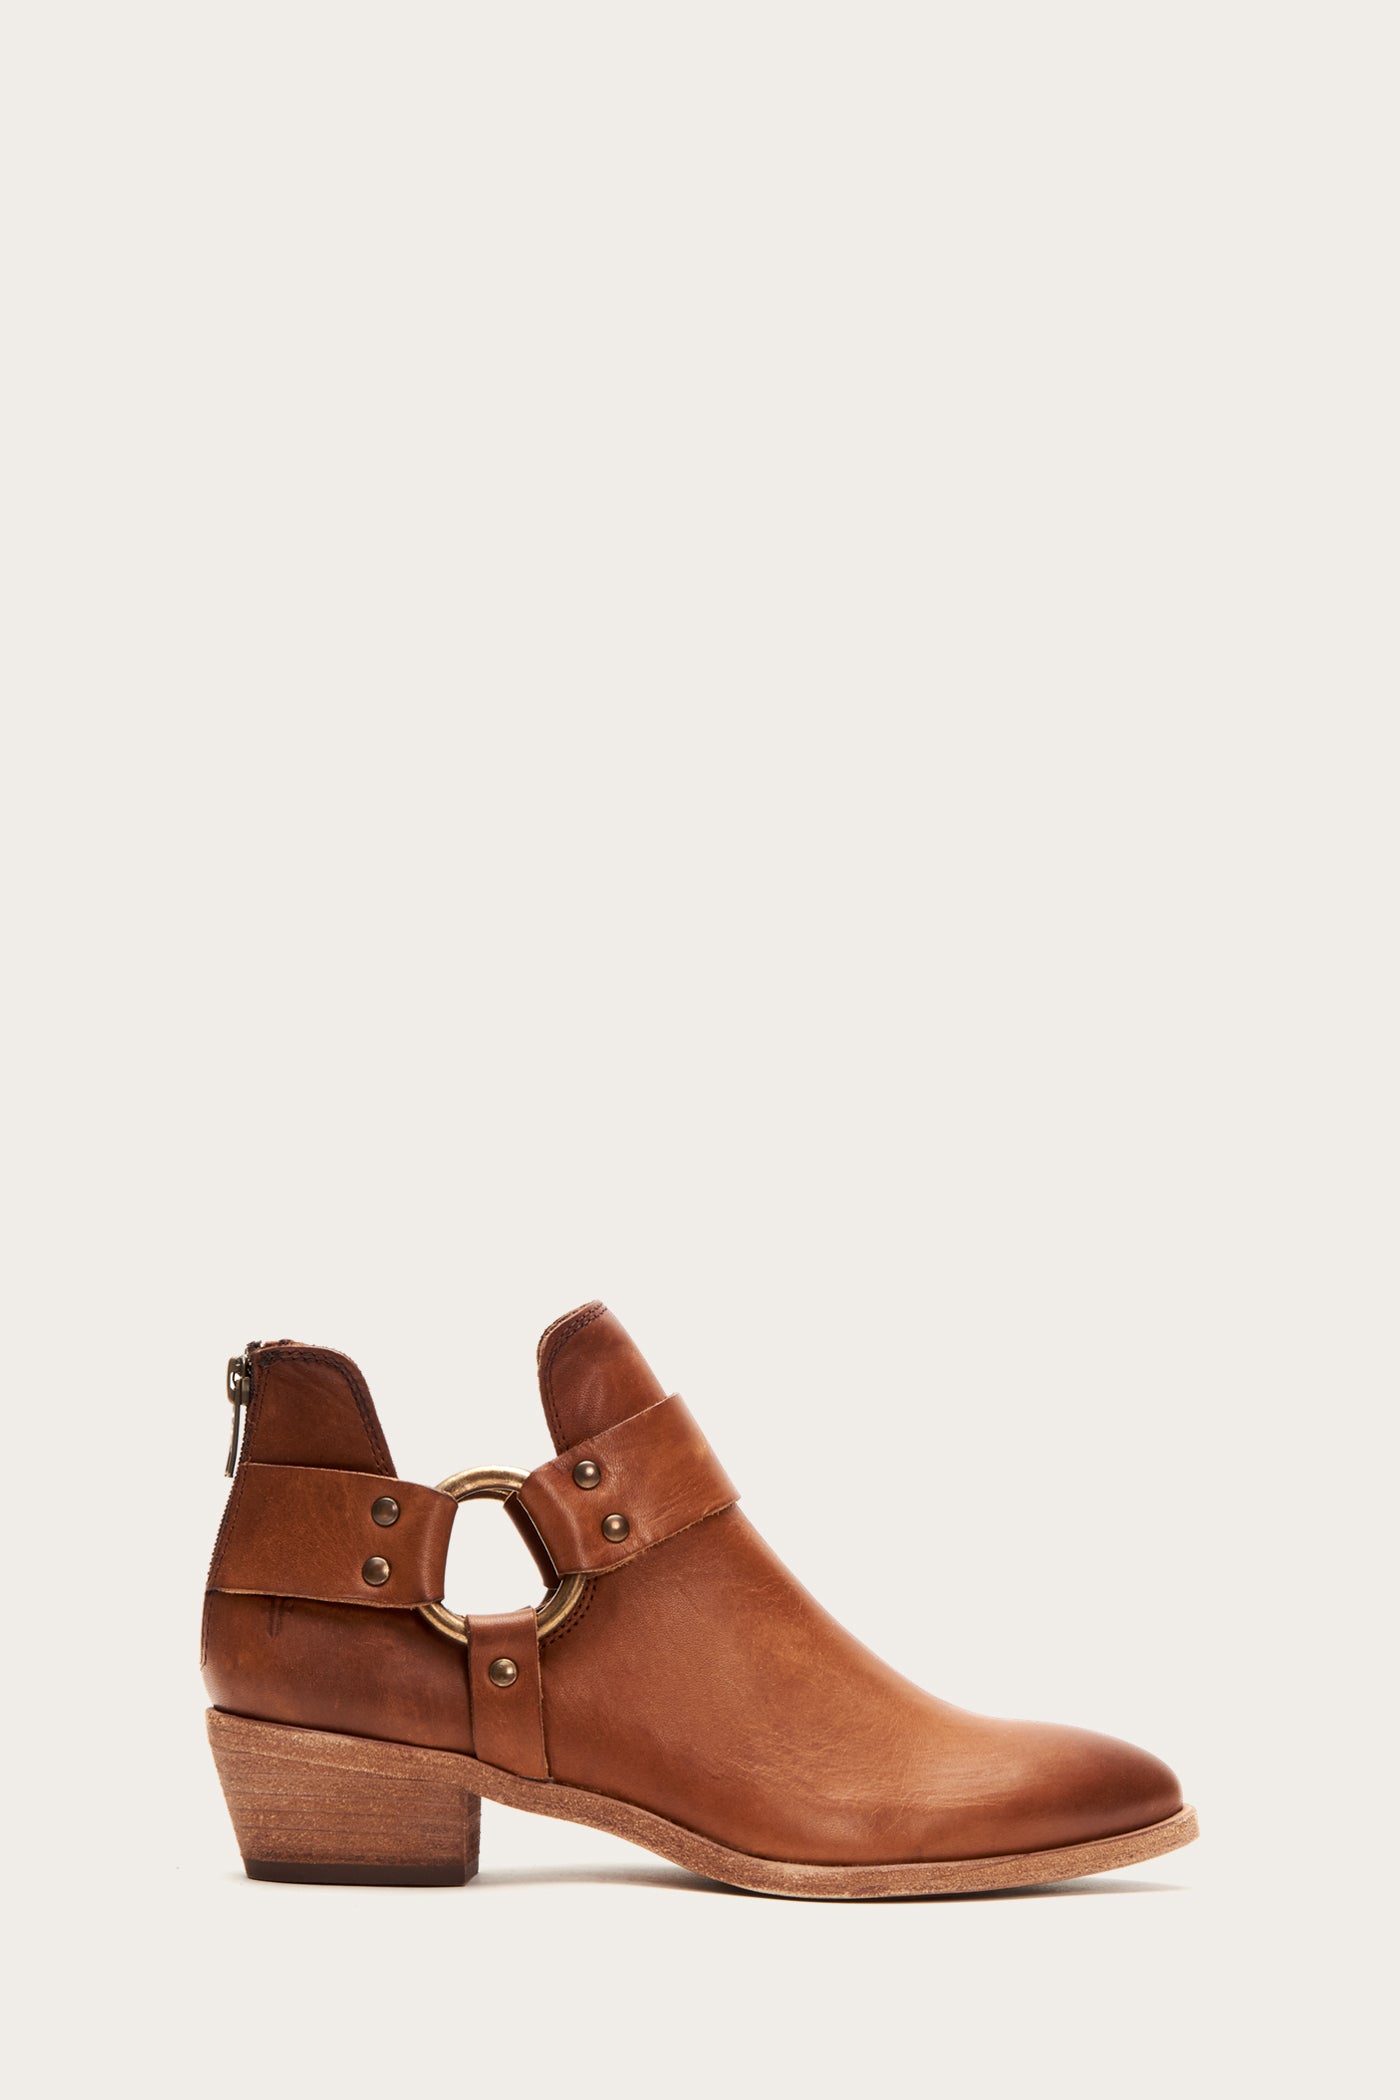 frye ray harness bootie